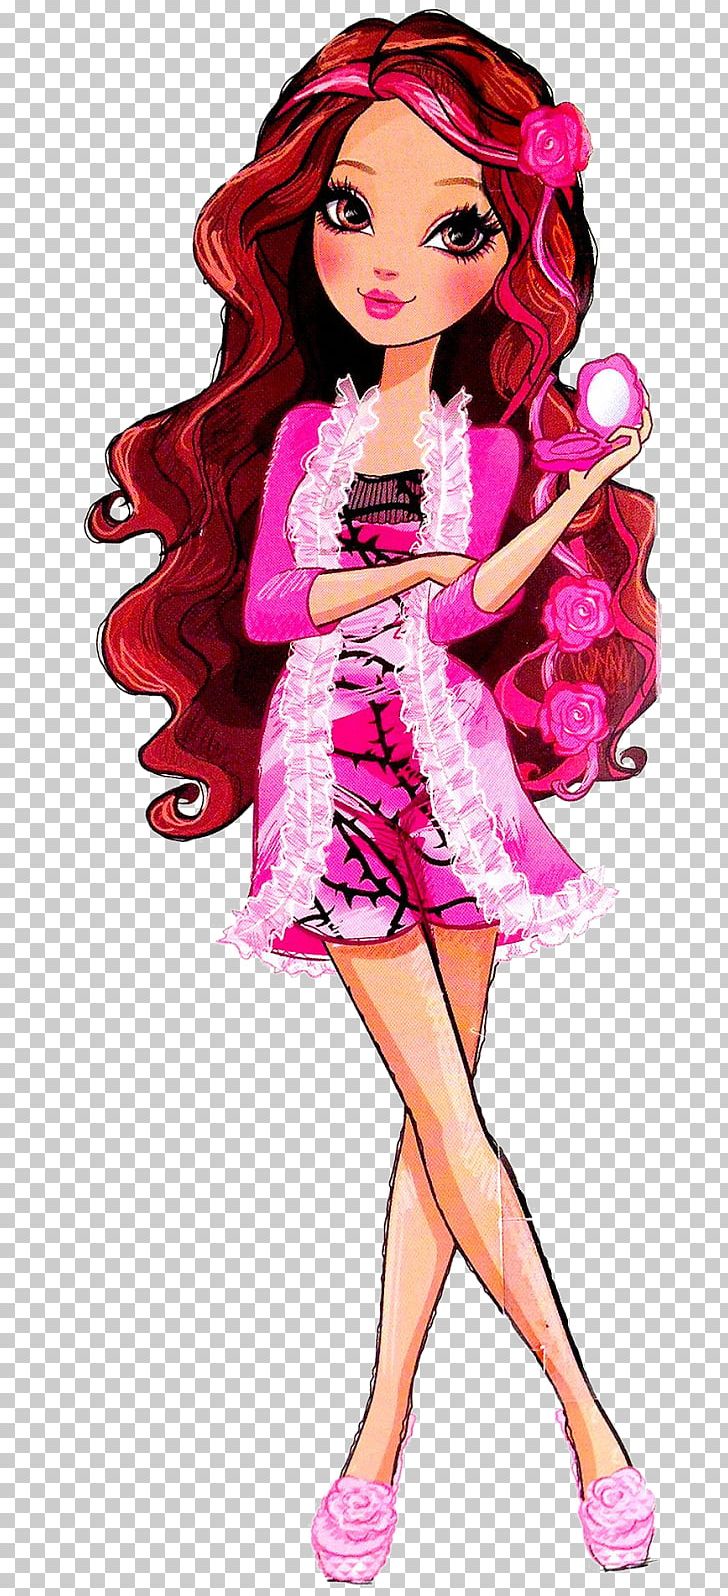 Ever After High Doll Work Of Art Drawing PNG, Clipart, Anime, Art, Barbie, Beauty, Black Hair Free PNG Download